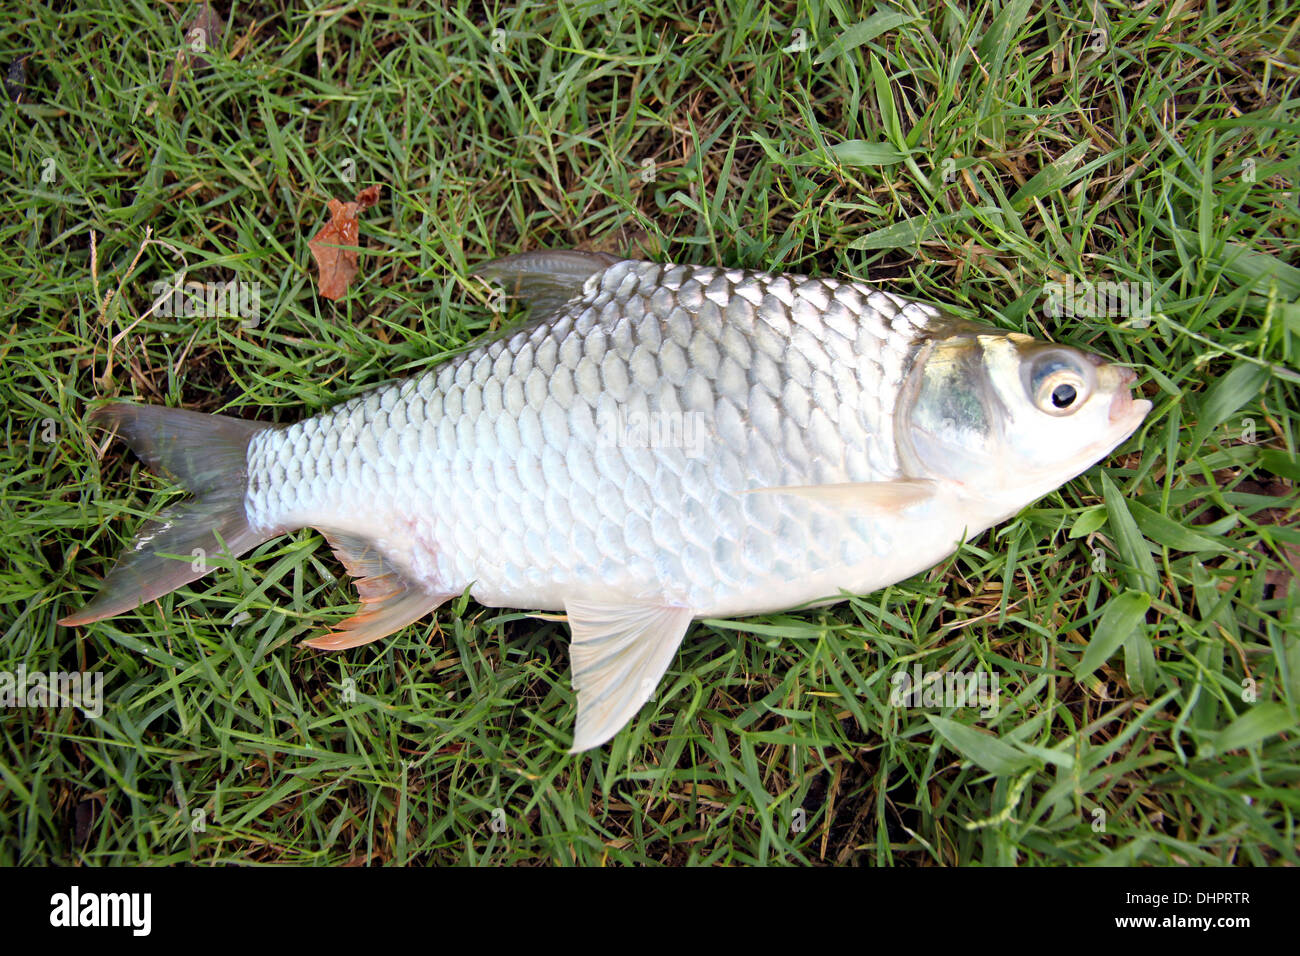 The Barb of Cyprinidae fish on the Green grass. Stock Photo